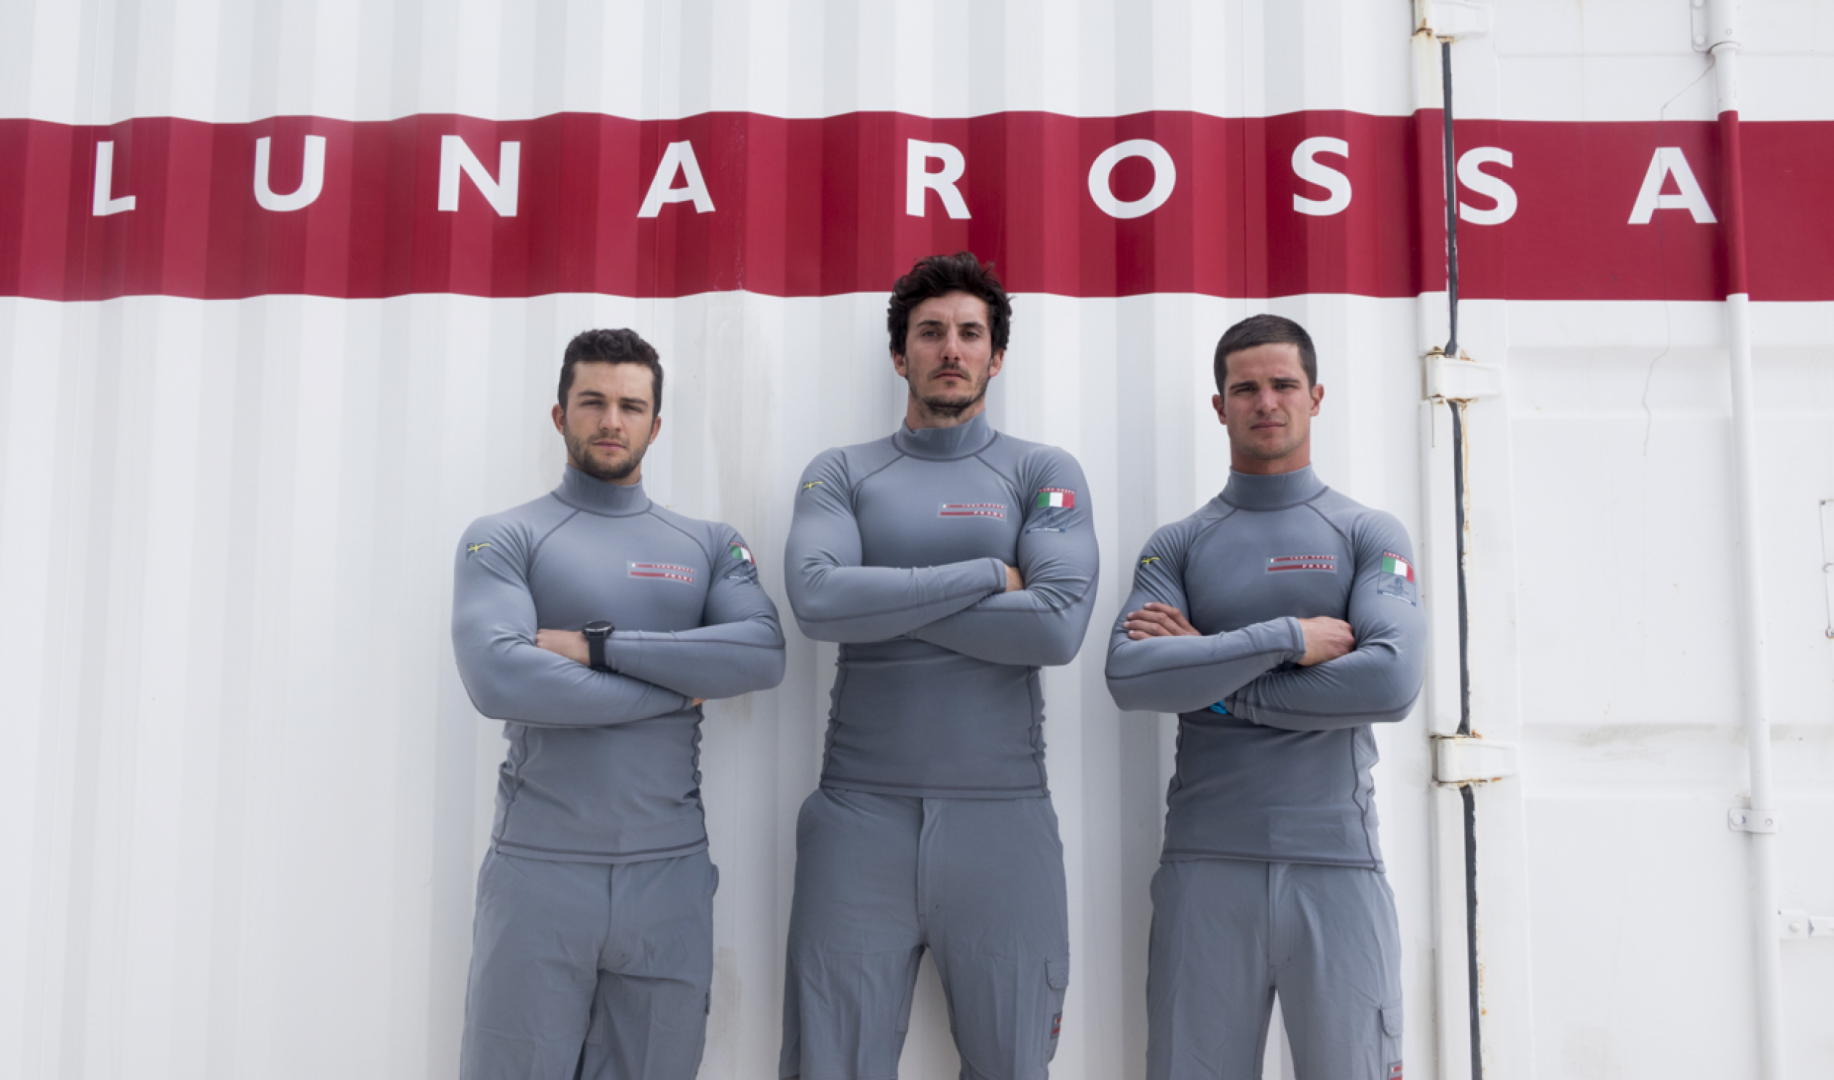 Luna Rossa is pleased to announce the names of the first three sailors